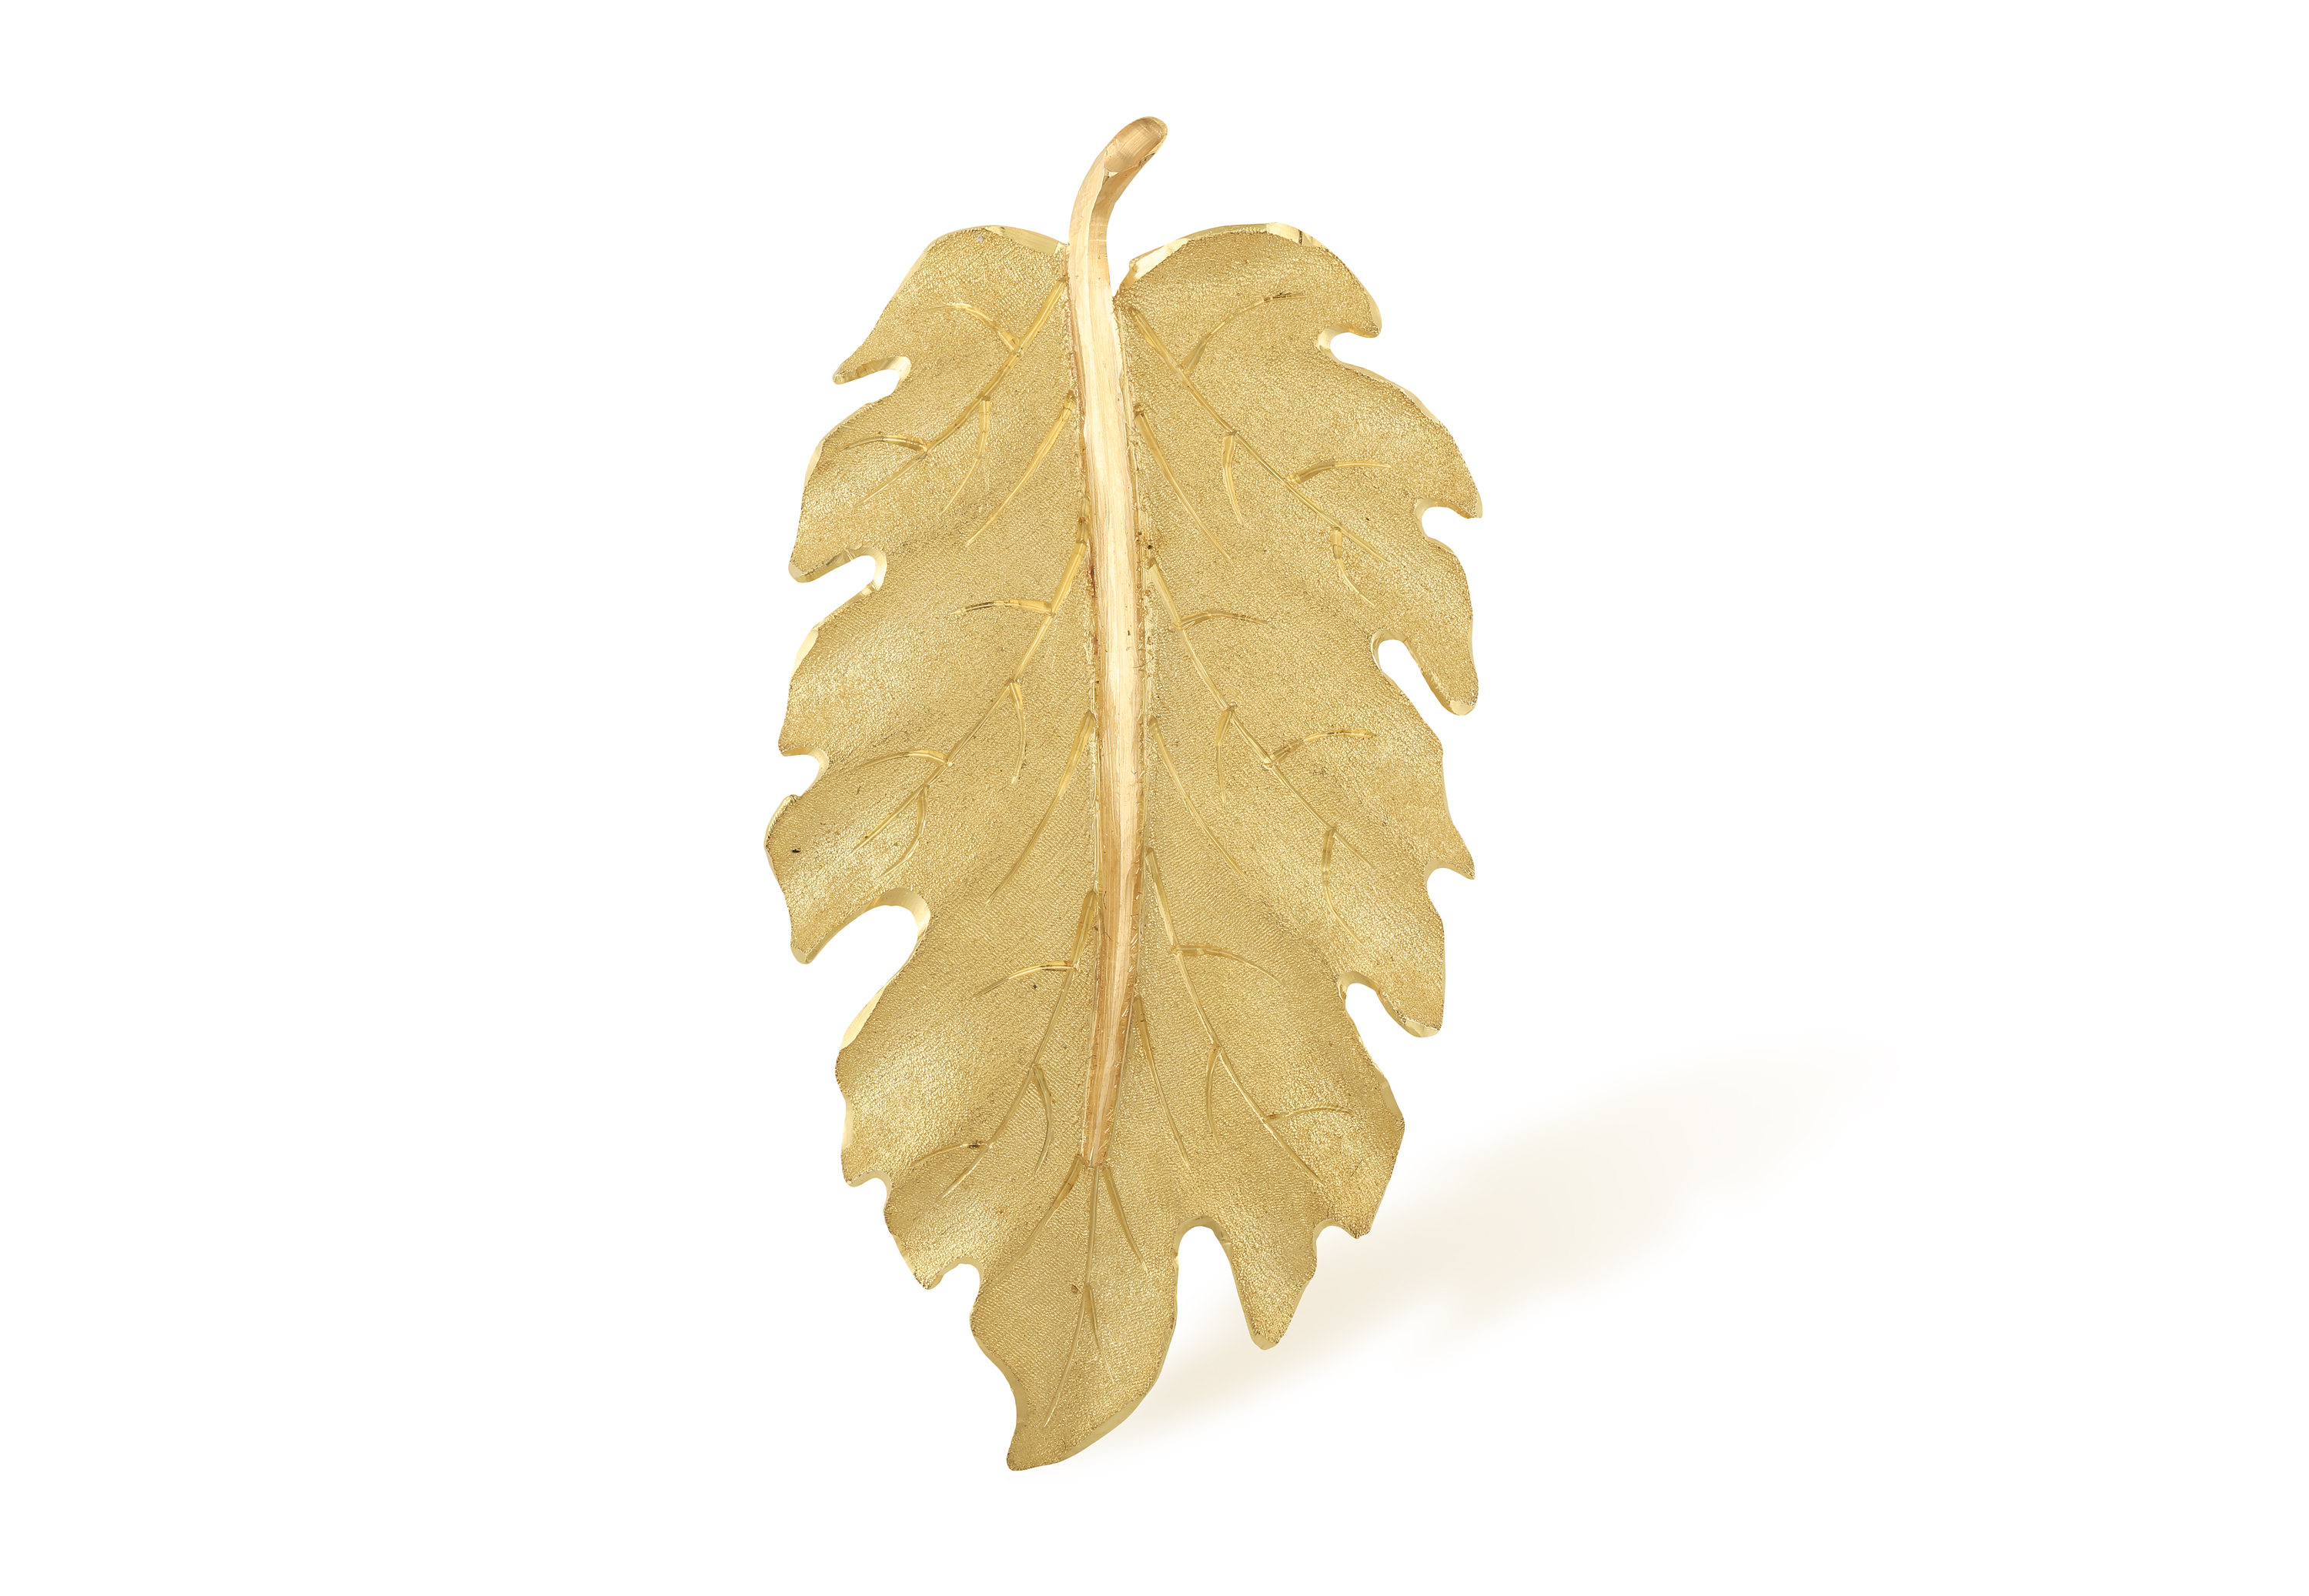 A GOLD 'FOGLIA' BROOCH, BY BUCCELLATI Designed as a delicate textured gold leaf, in 18K gold, signed